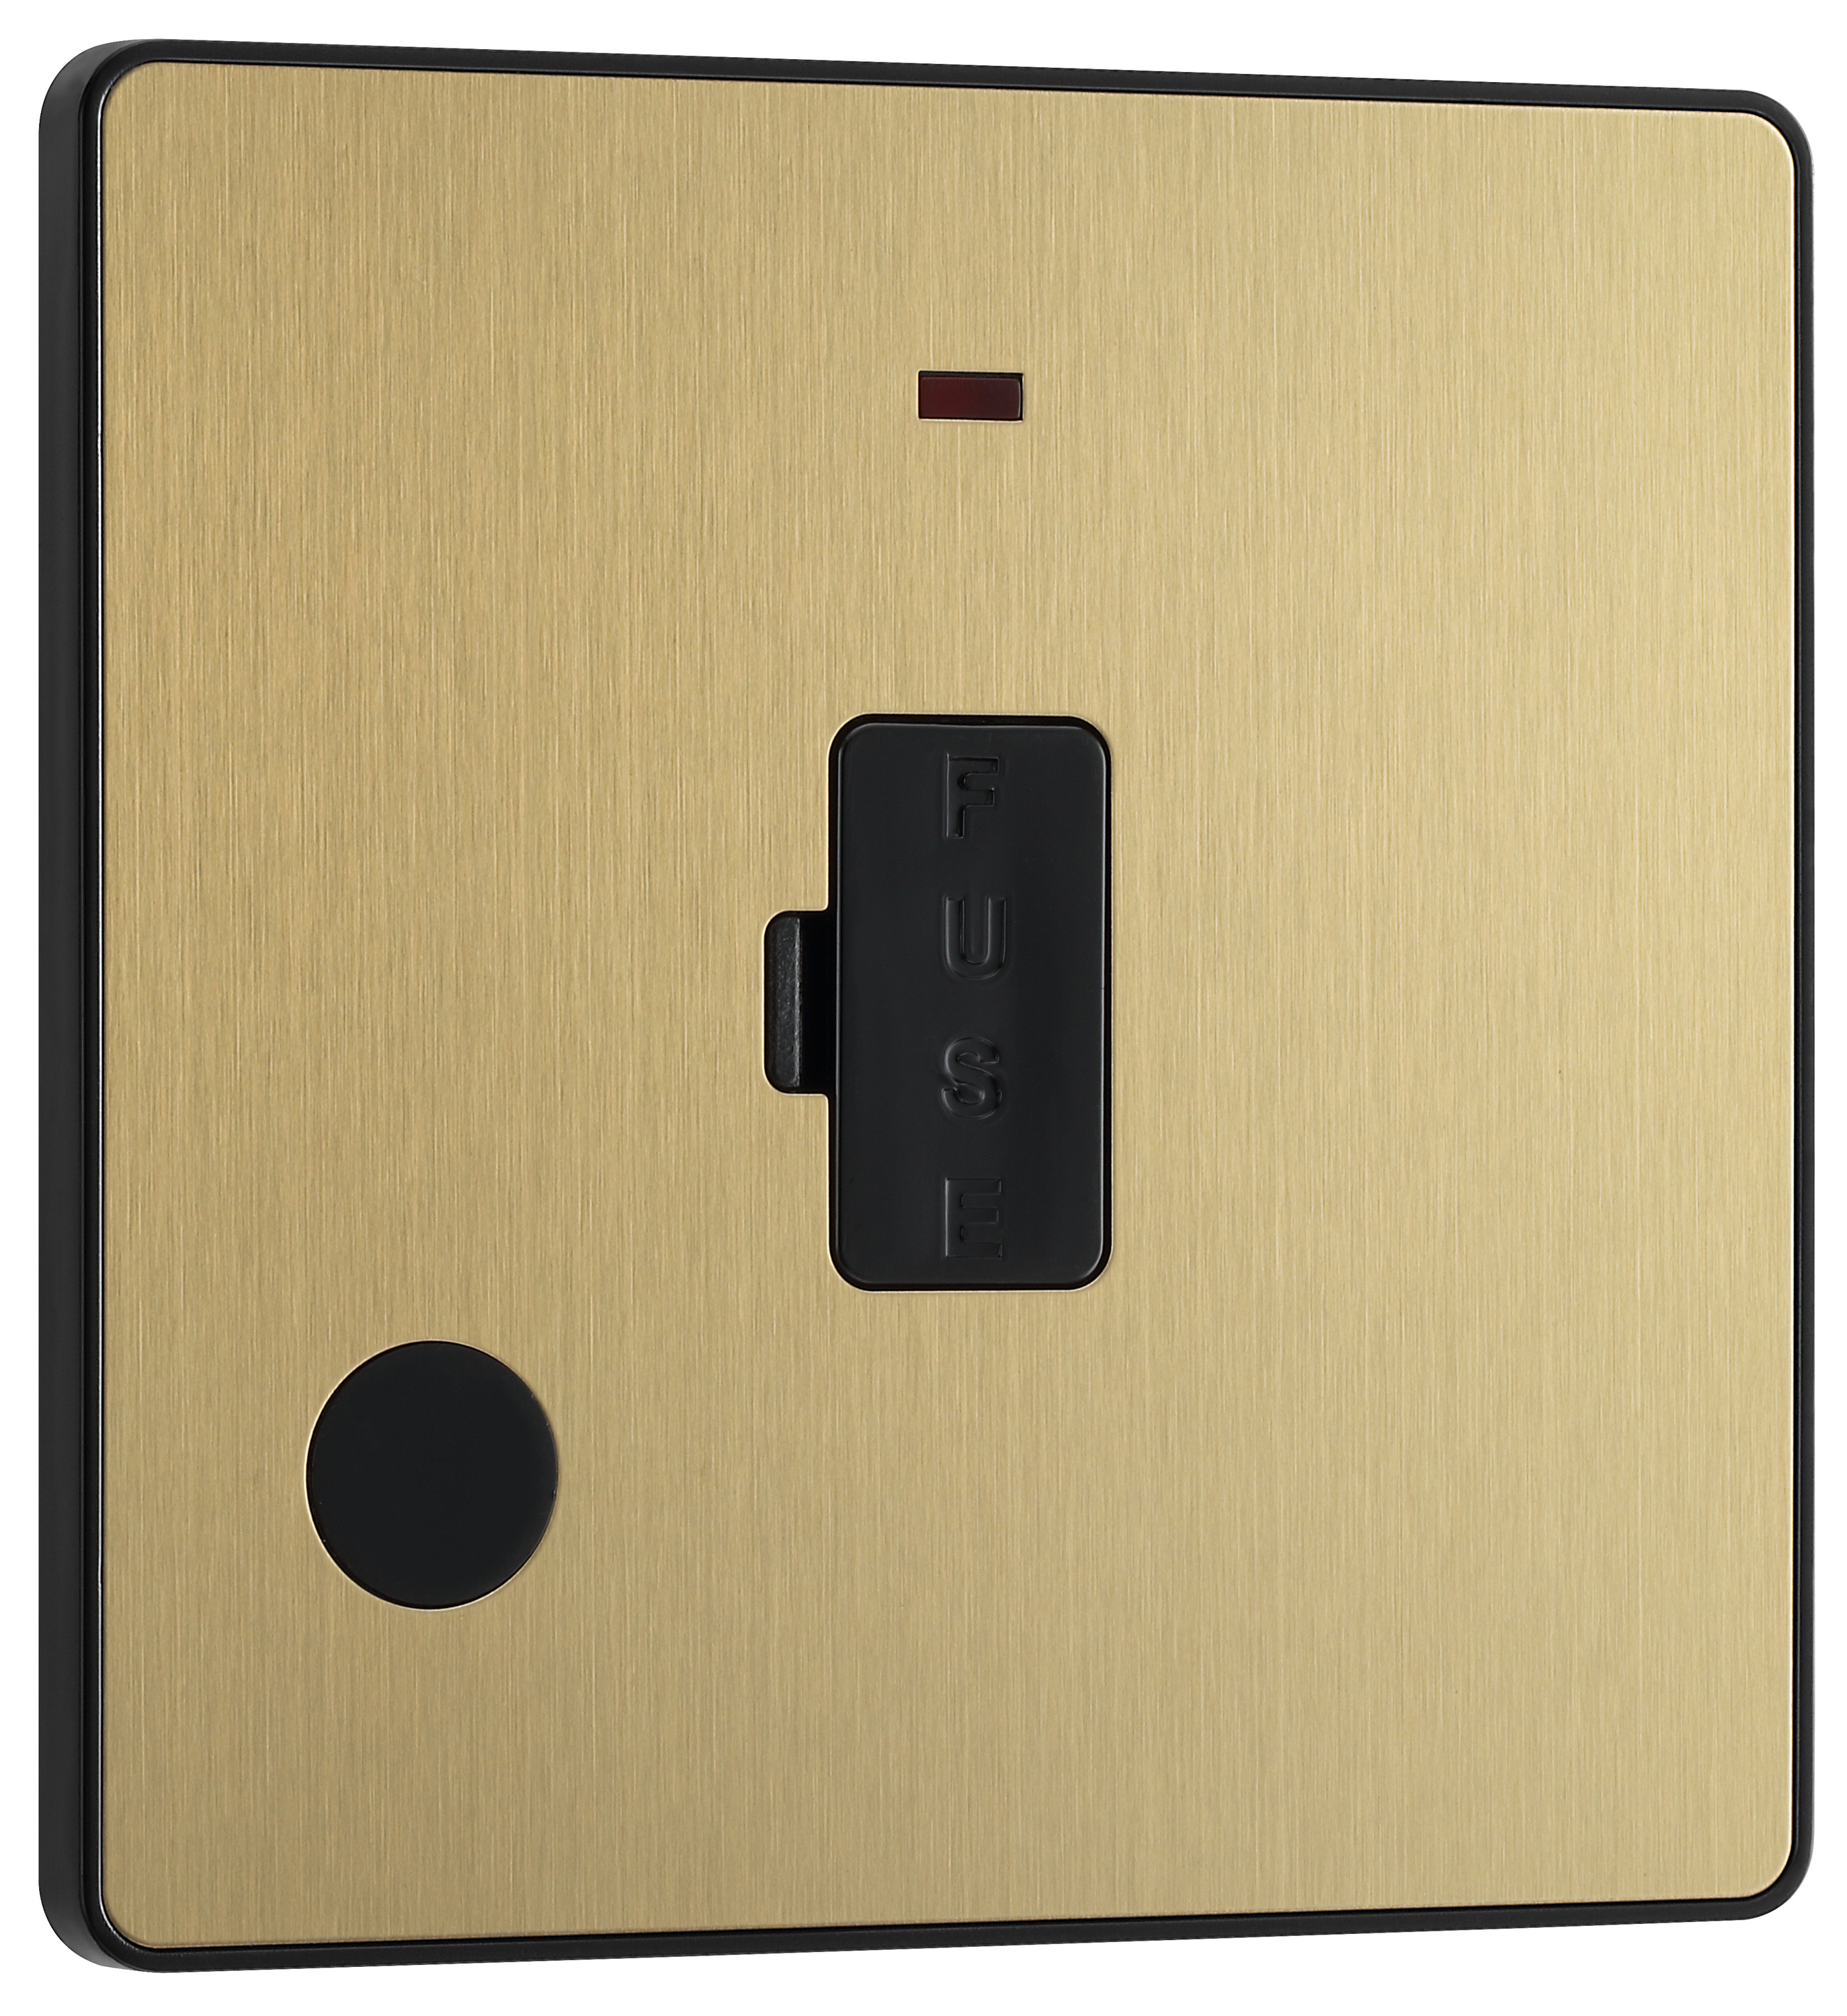 BG Evolve Brushed Brass 13A Unswitched Fused Connection Unit with Power Led Indicator & Flex Outlet